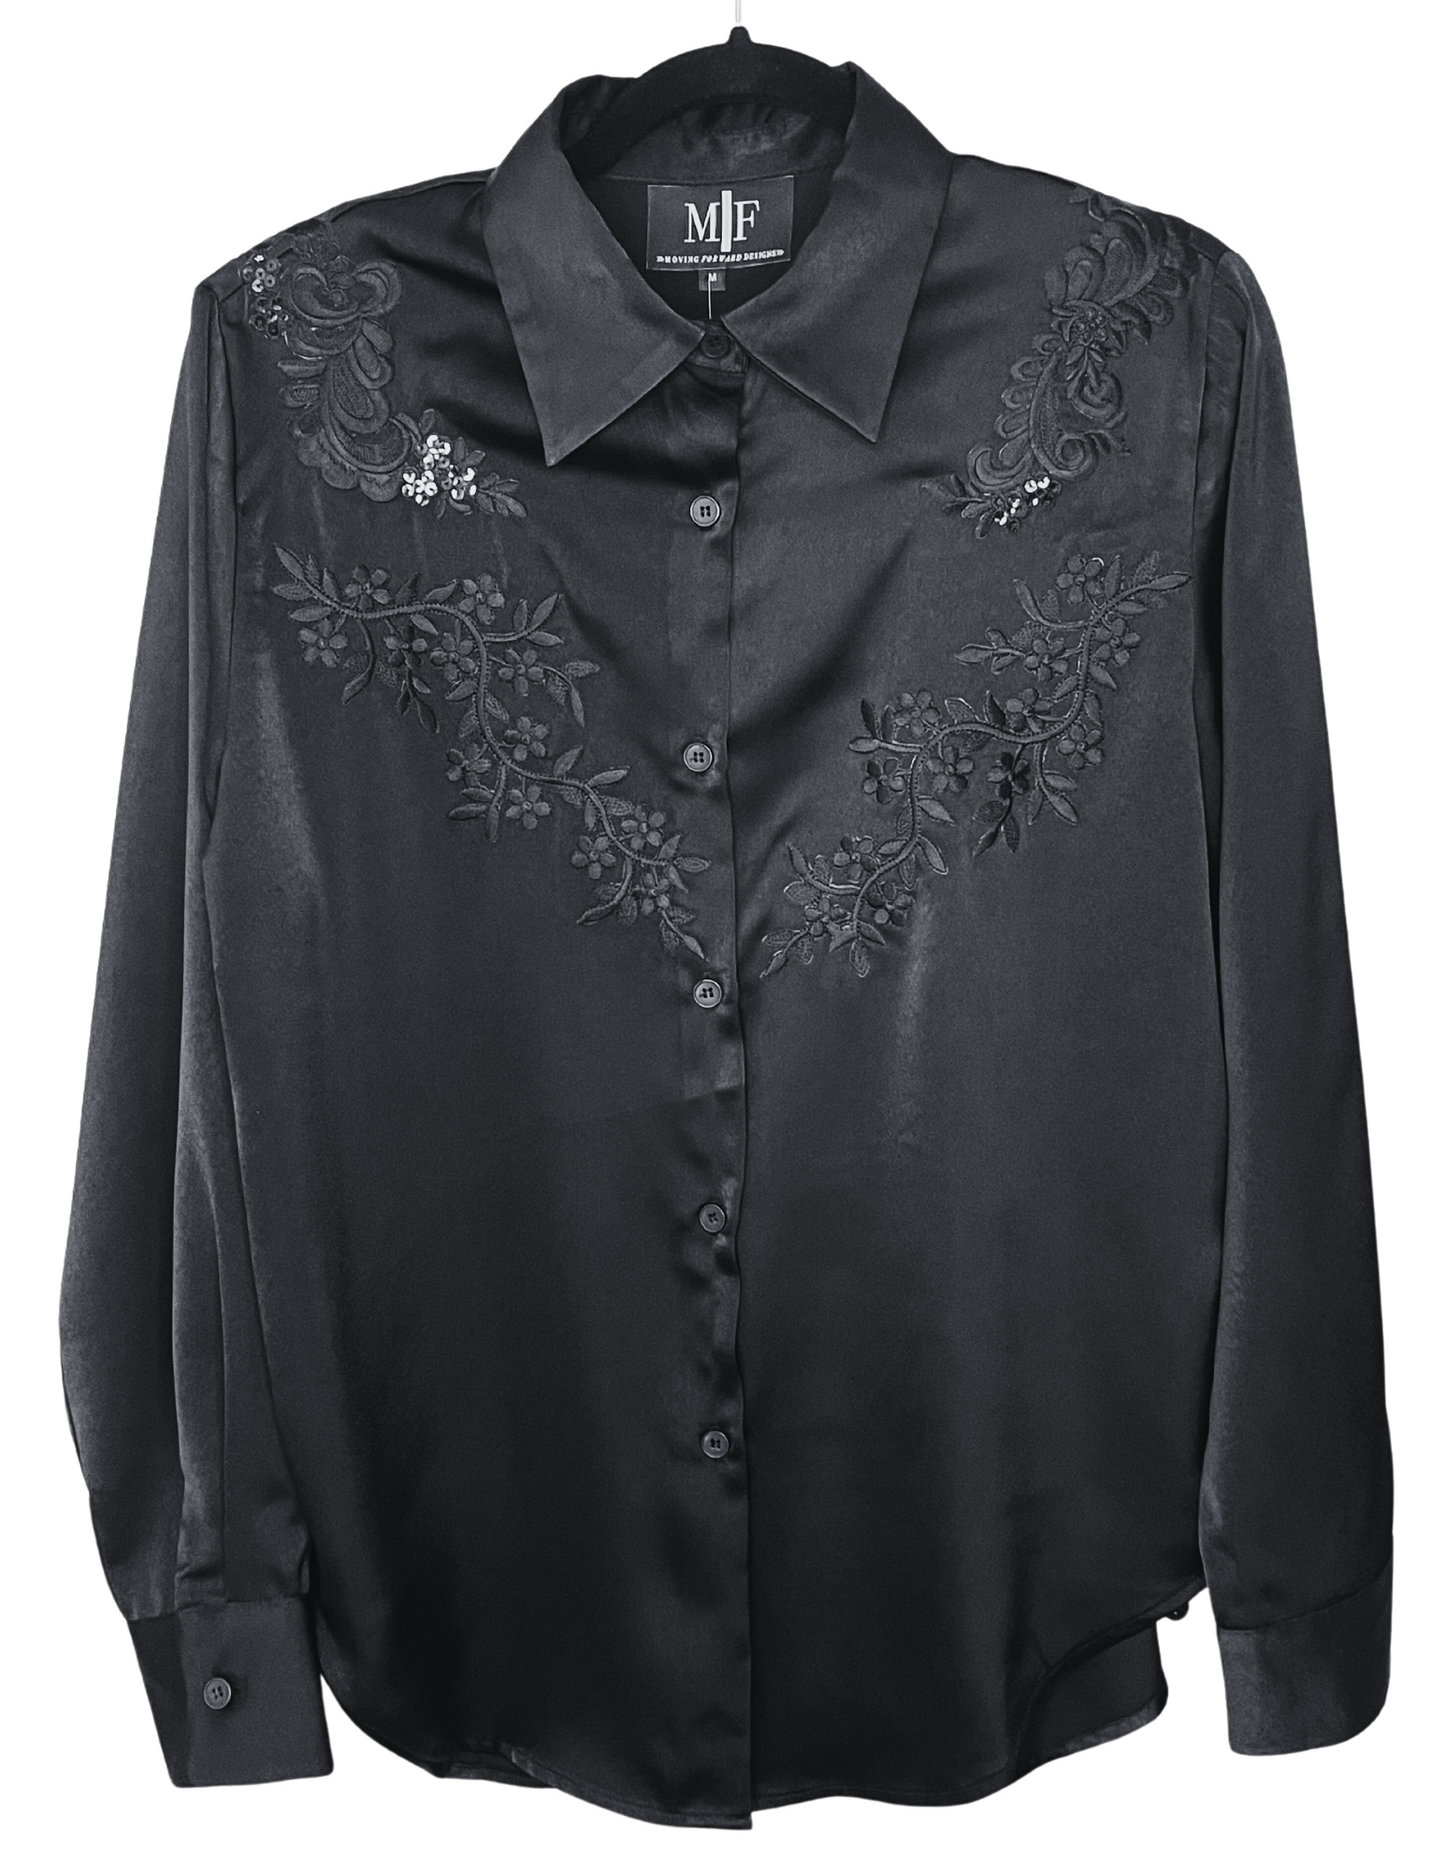 Shirt, Silky Black, Lace Flowers